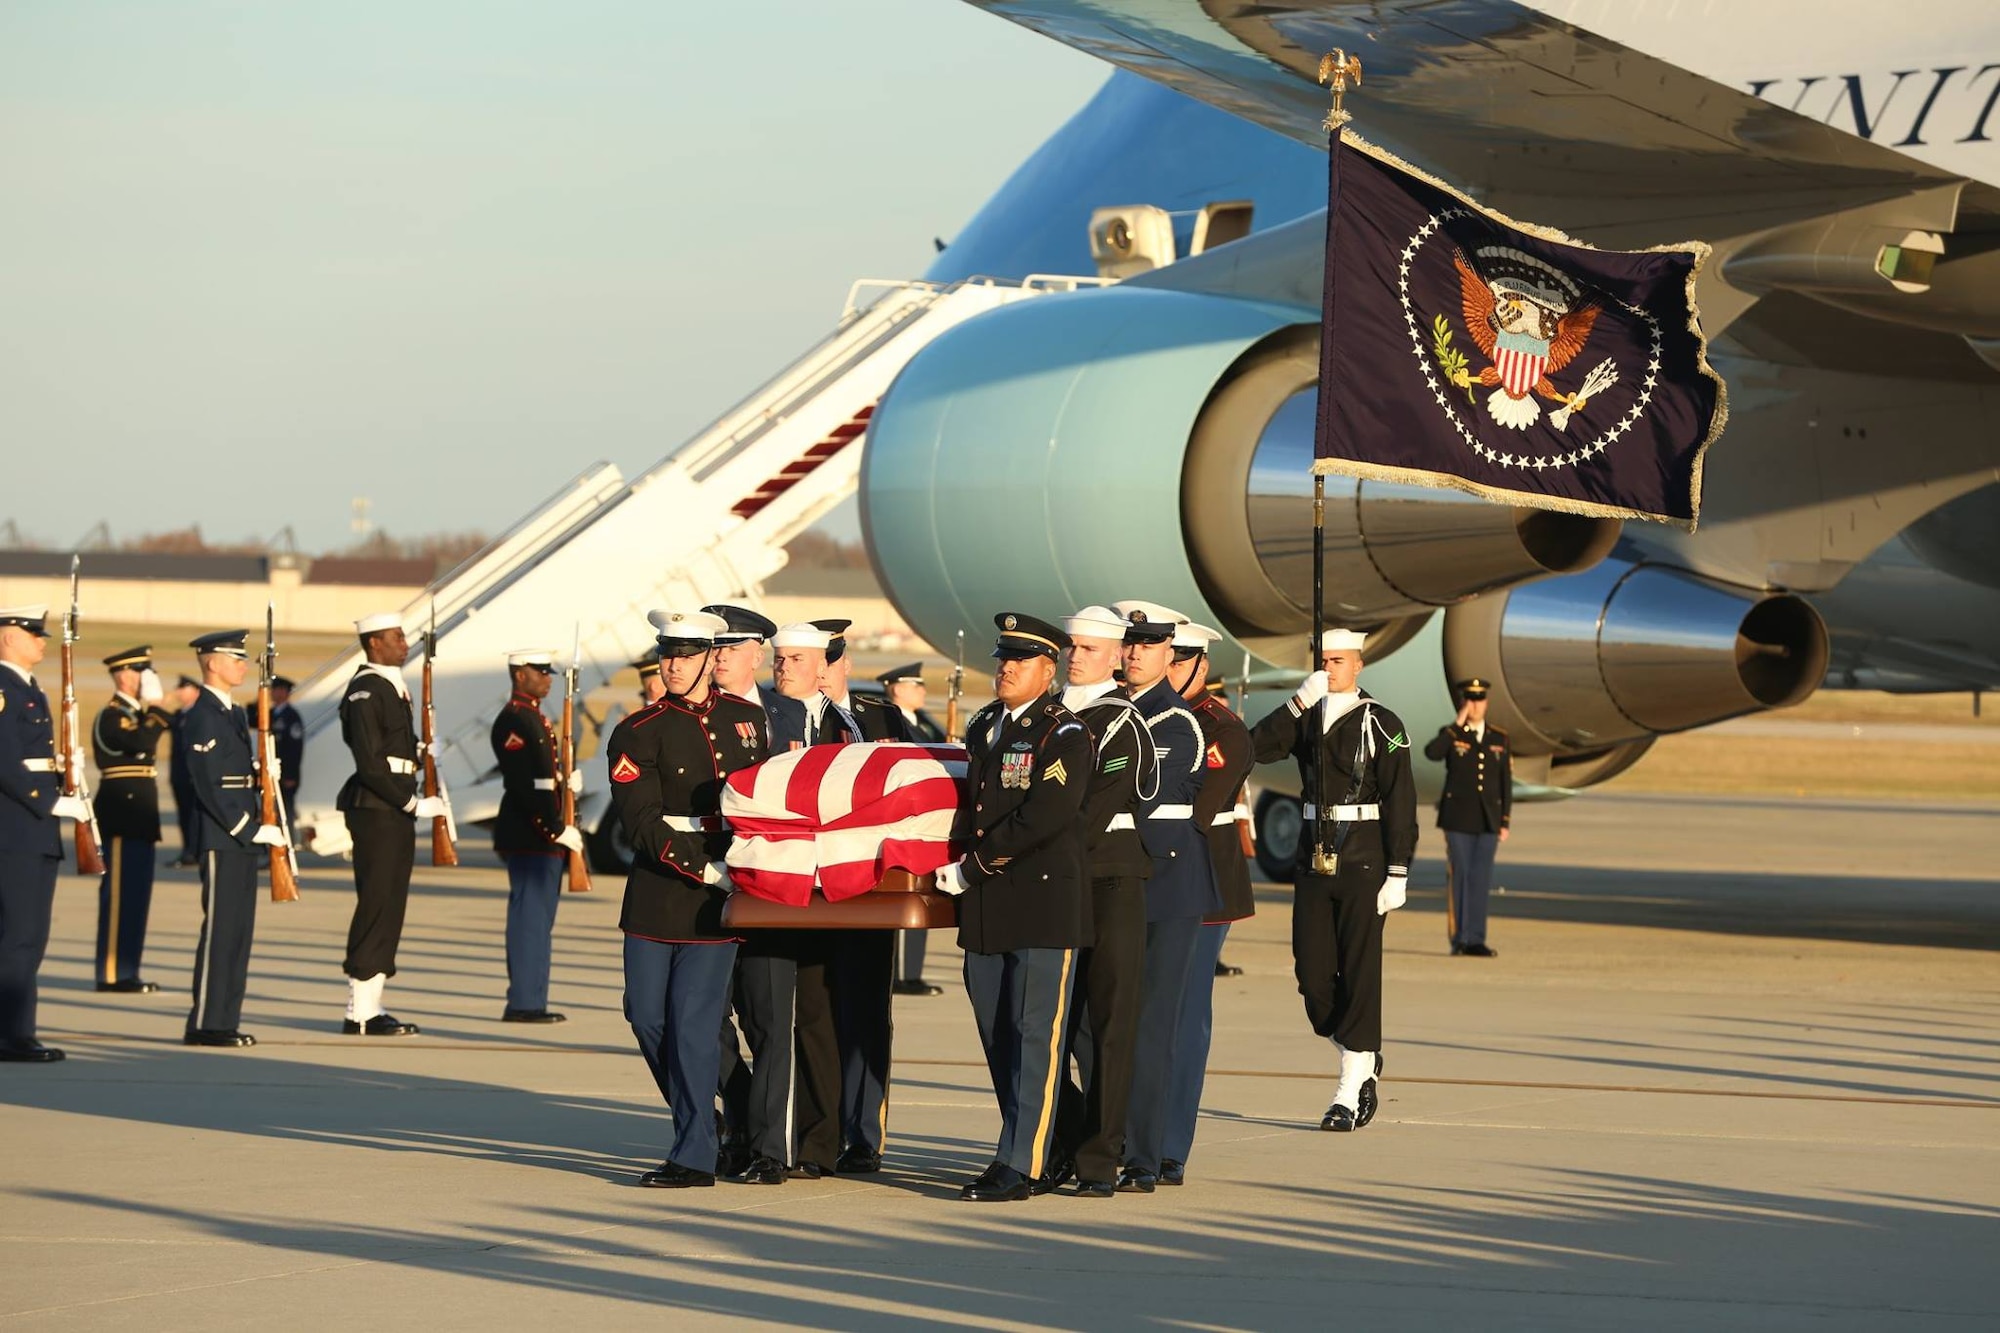 U.S. service members with the Ceremonial Honor Guard carry the casket of George H. W. Bush, the 41st President of the United States, at Andrews Air Base, Md., Dec. 03, 2018.